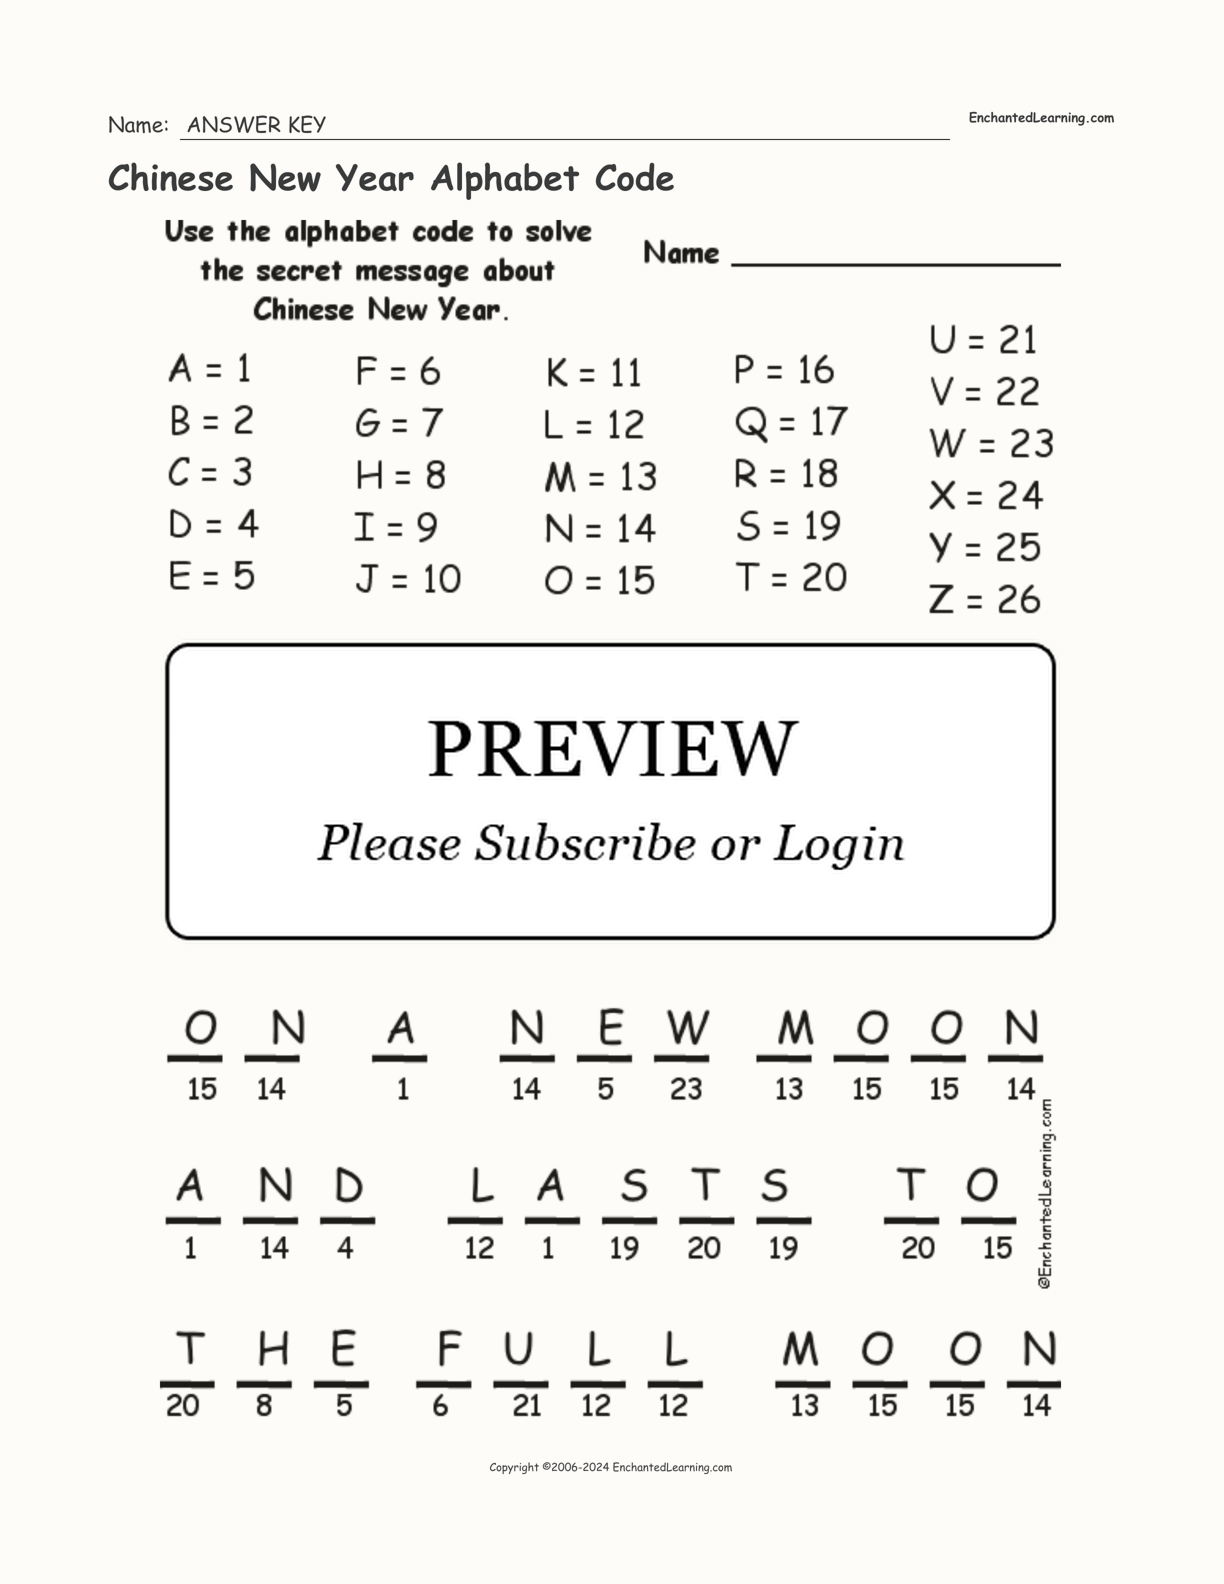 Chinese New Year Alphabet Code interactive worksheet page 2